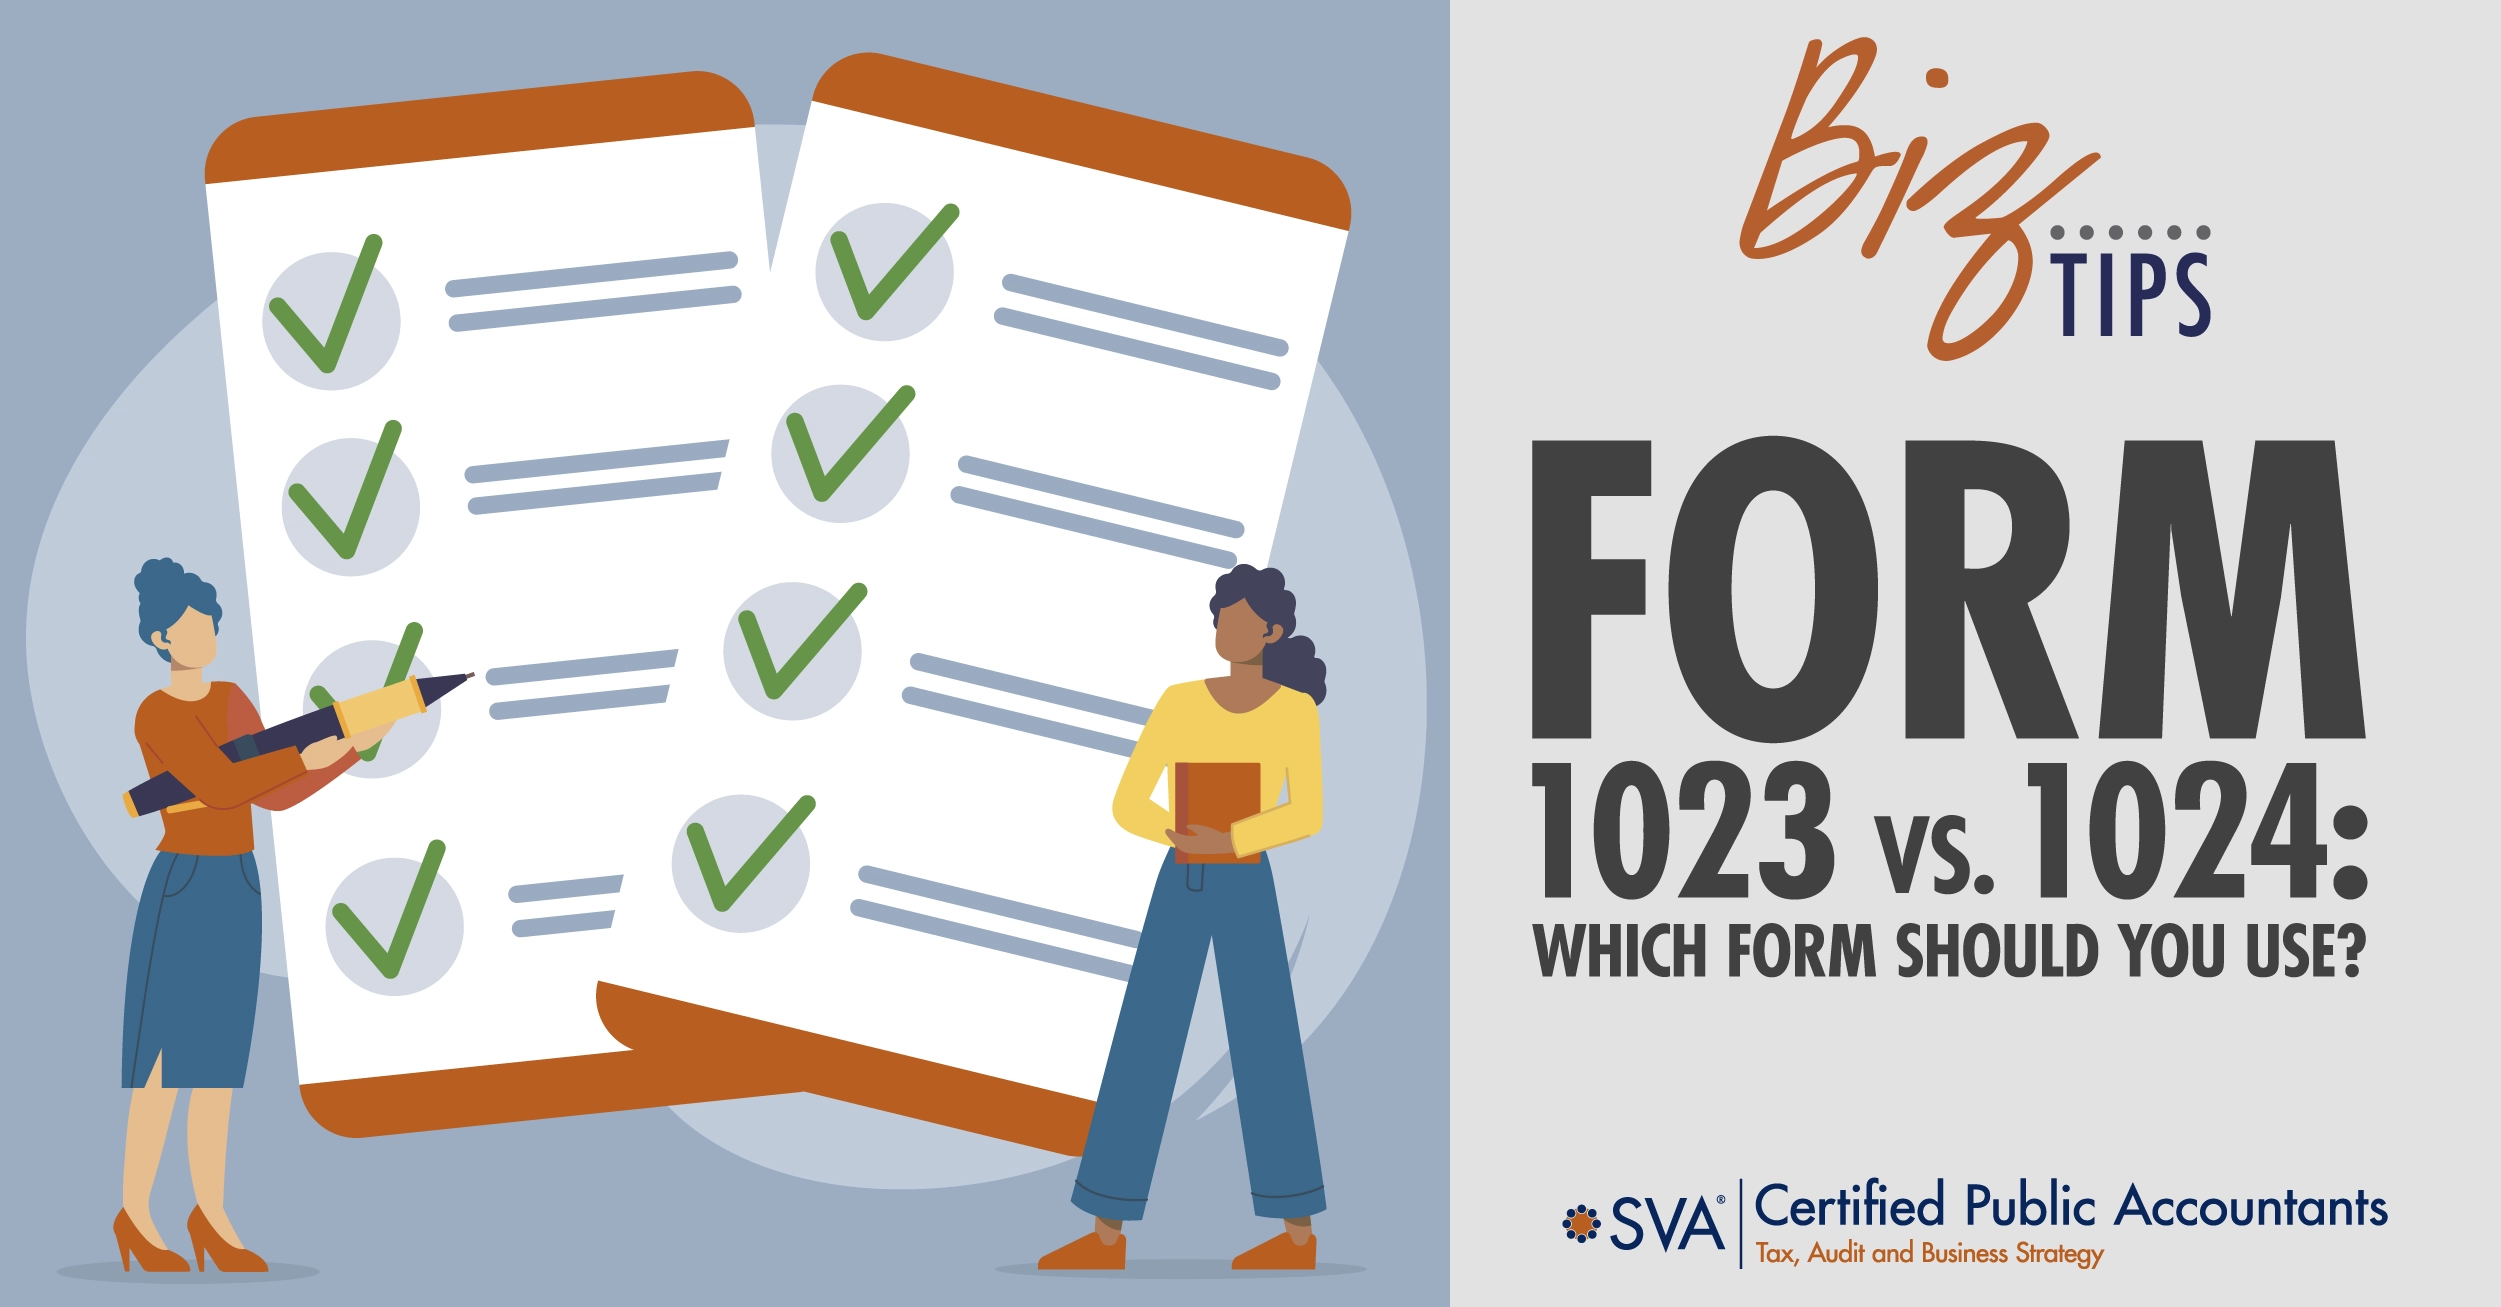 Form 1023 vs. 1024: Which Form Should You Use?